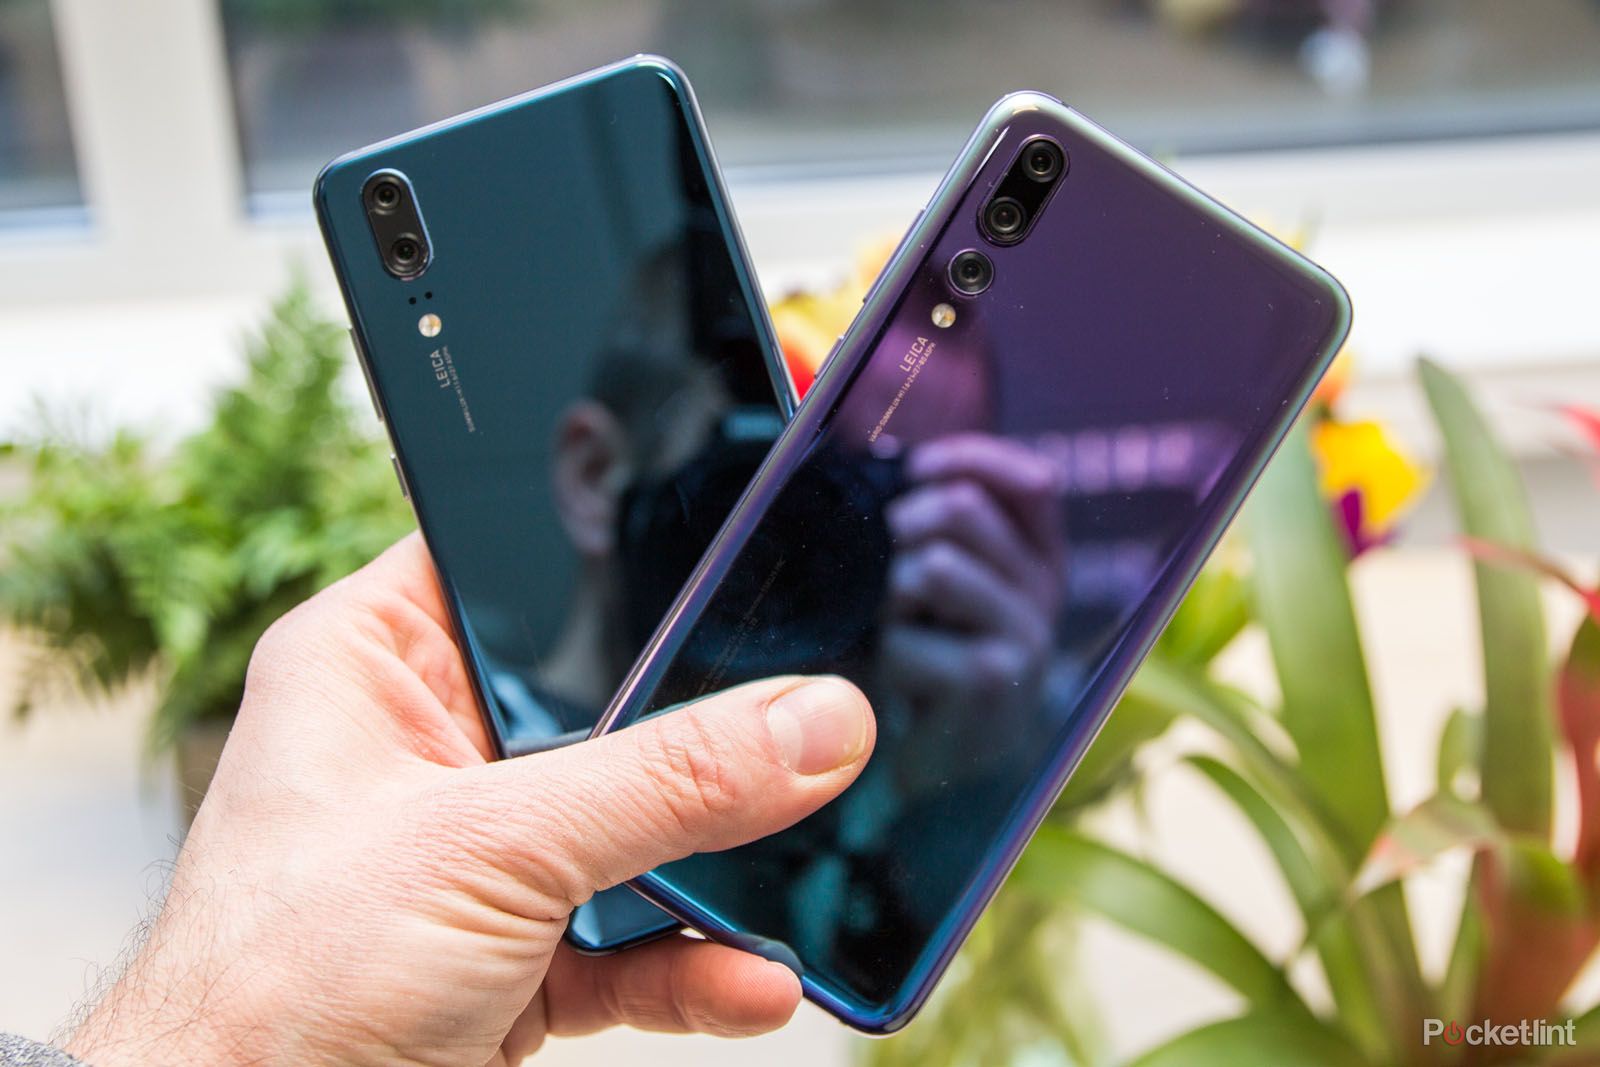 Huawei announces 6 million P20 smartphones sold Whats all the fuss about image 1